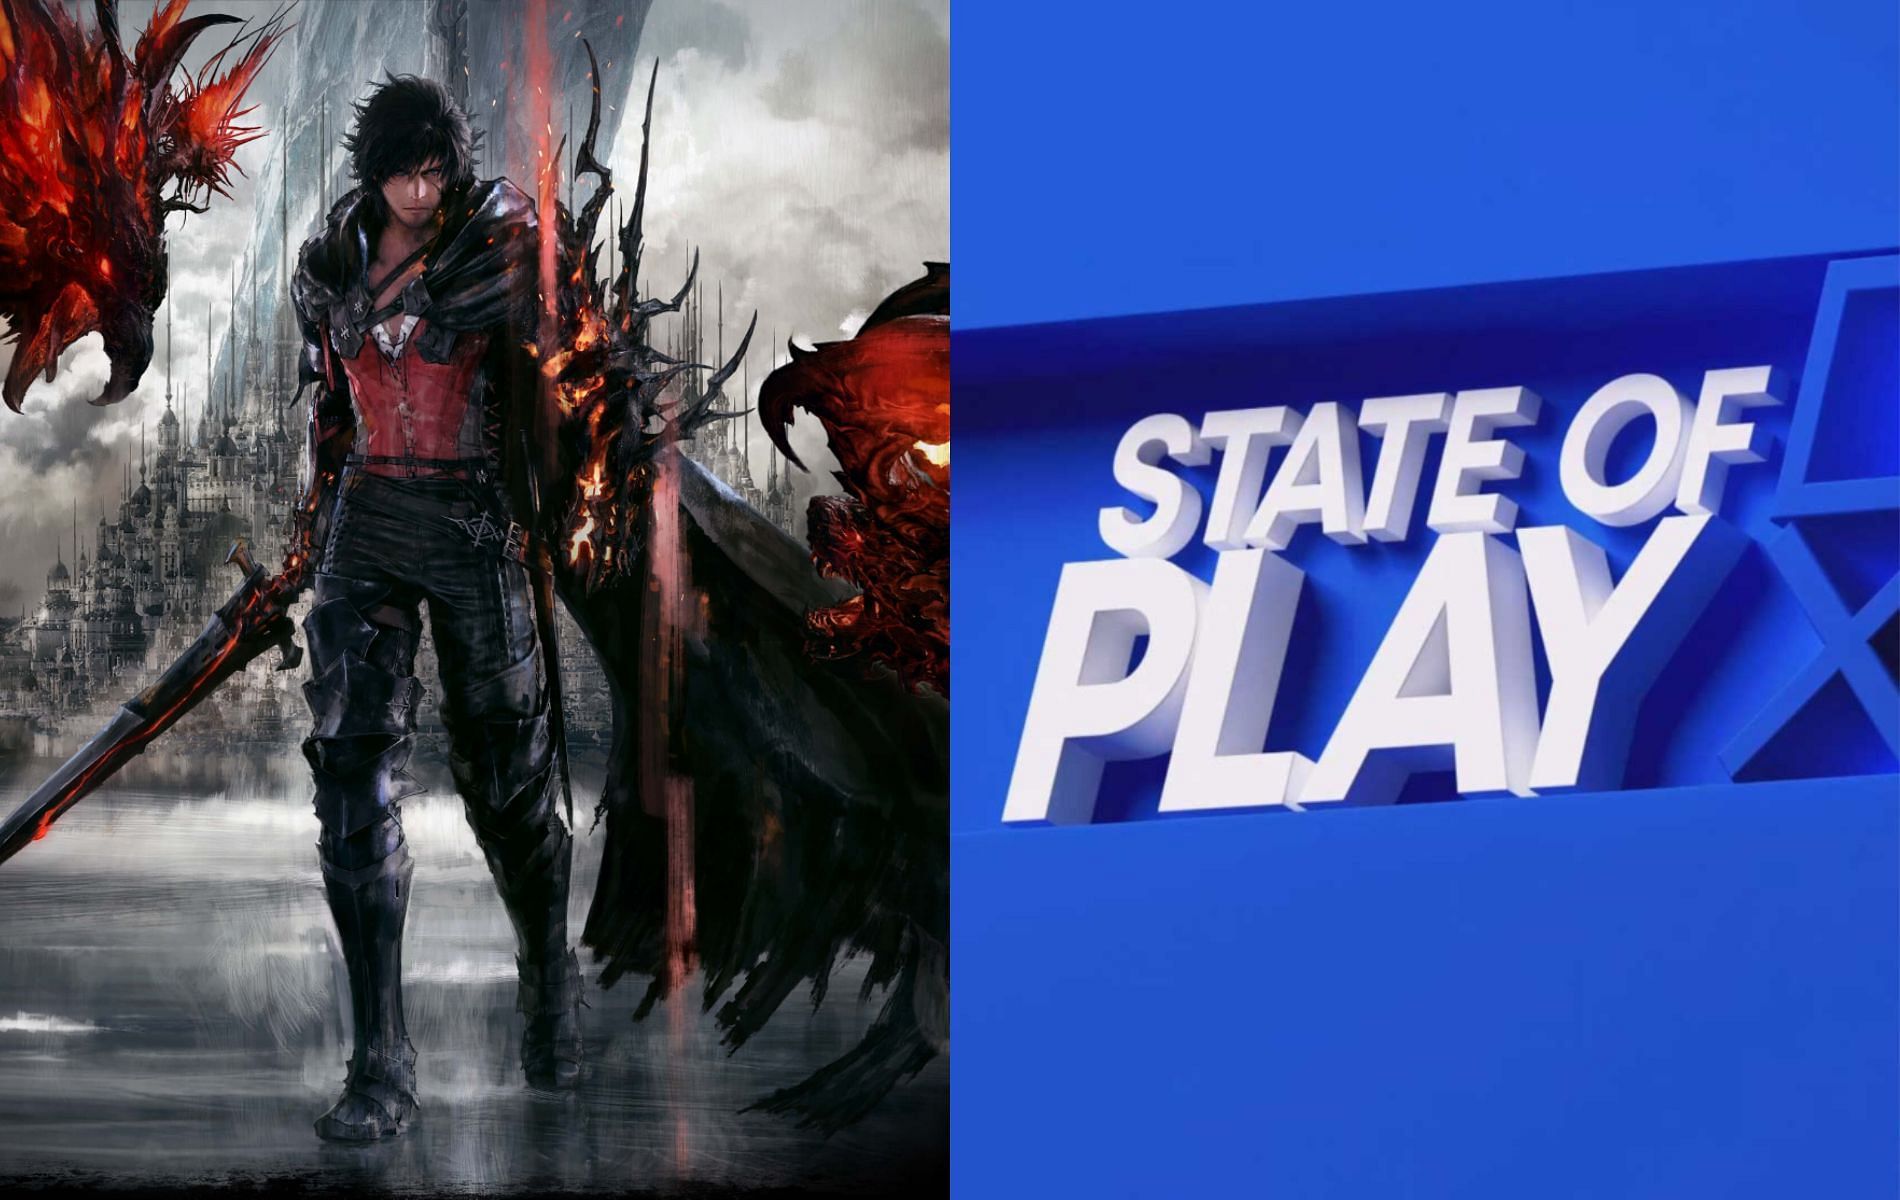 Are you excited for the upcoming Sony event? (Images via Square Enix/Sony)